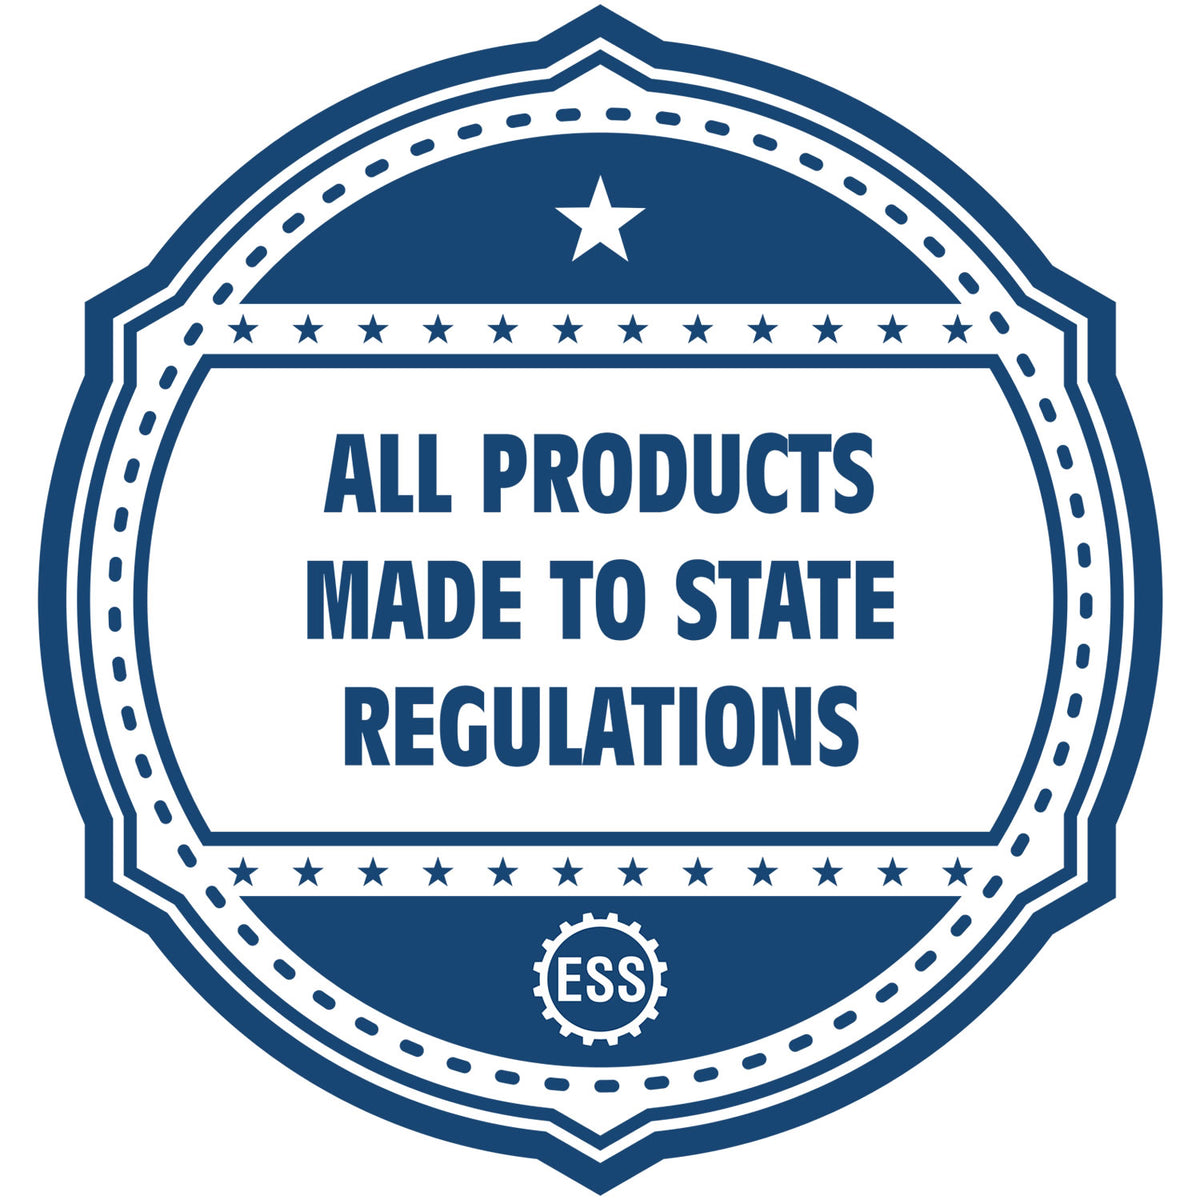 A blue icon or badge for the Hybrid Iowa Landscape Architect Seal showing that this product is made in compliance with state regulations.